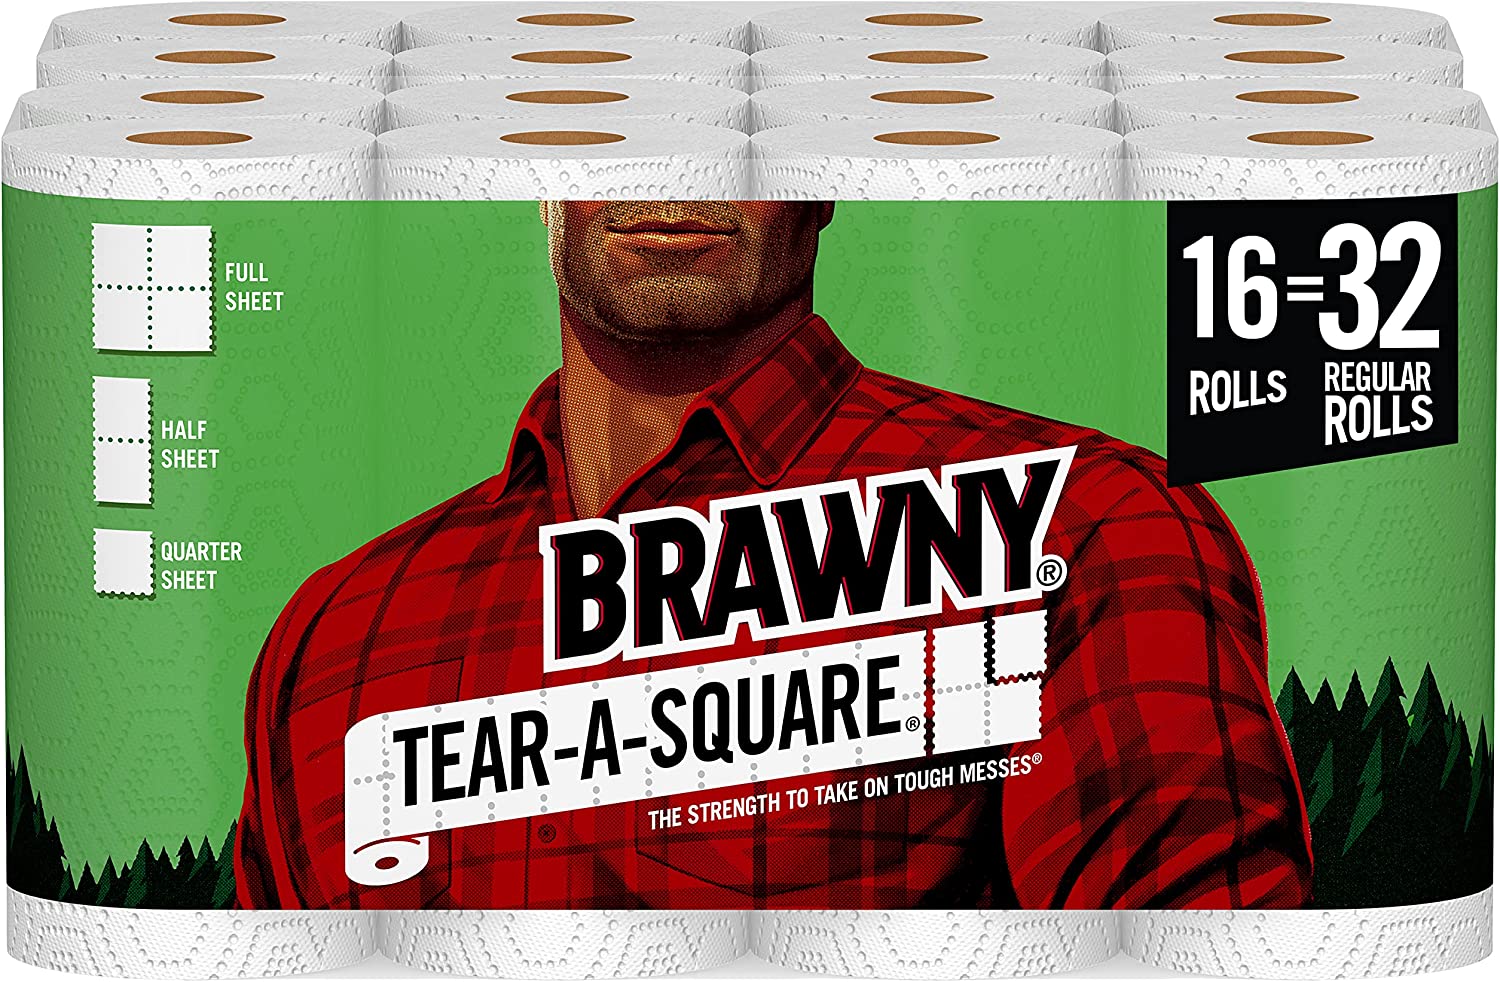 Brawny Tear-A-Square 2-Ply Paper Towels